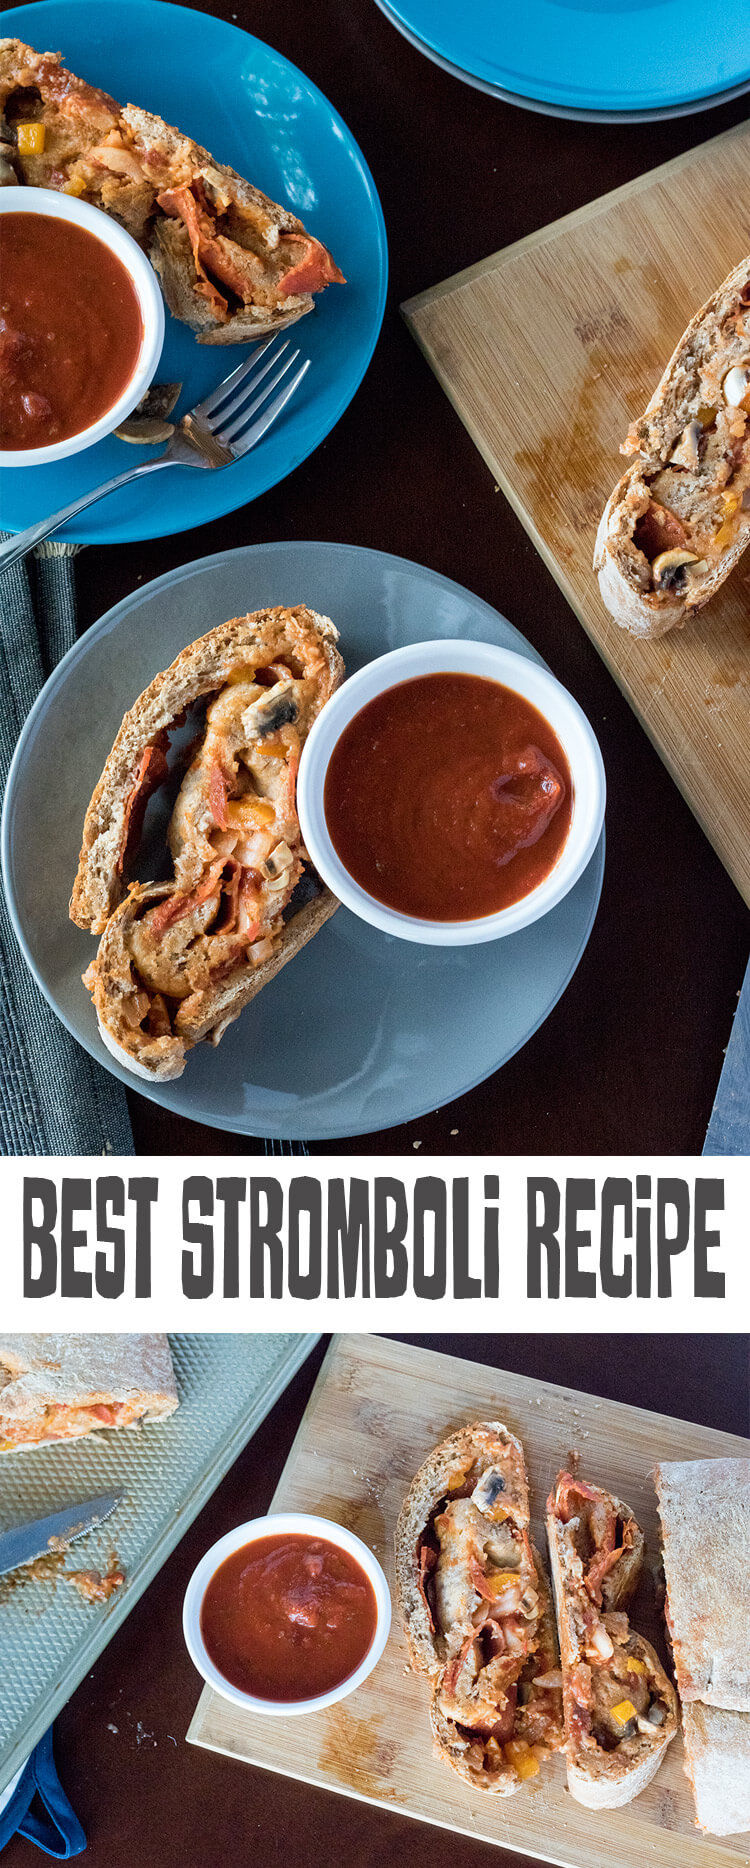 Easy Stromboli recipe for delicious Italian dinner from Life Sew Savory